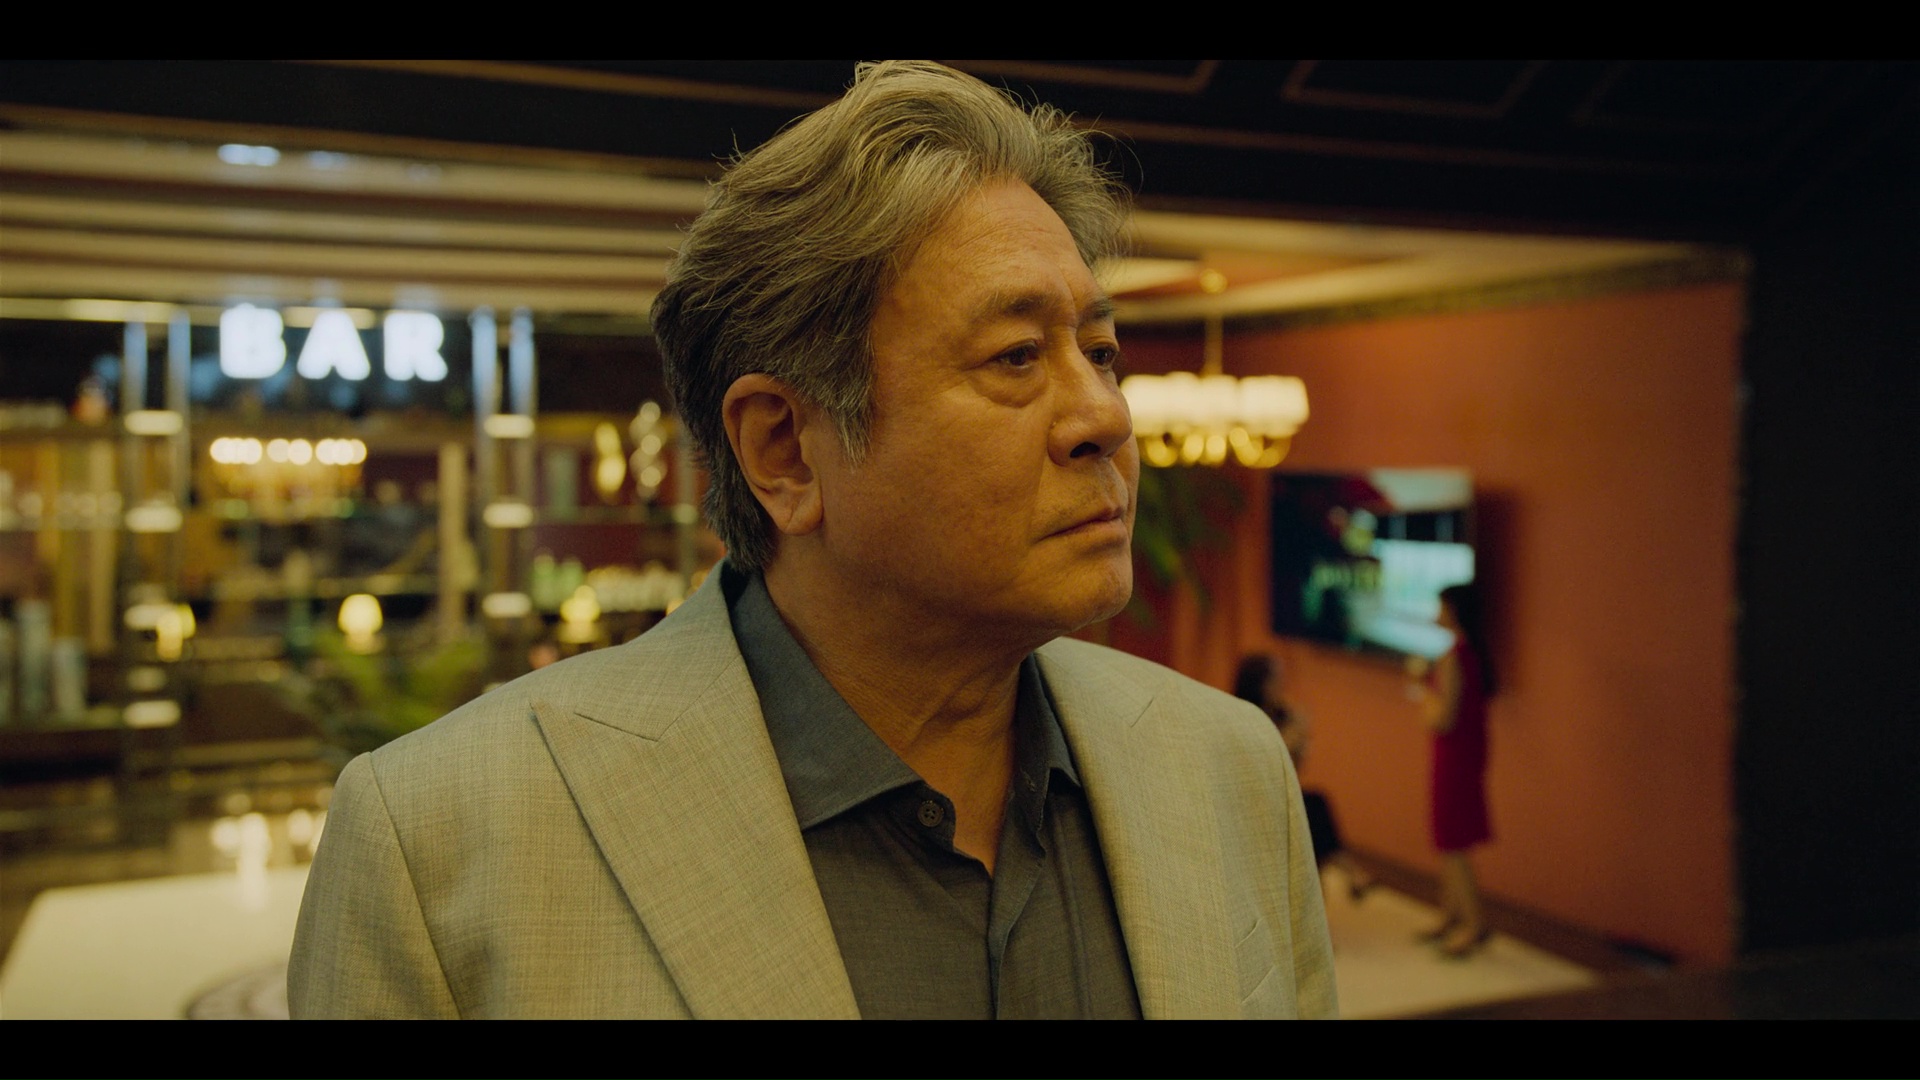 First Impression Review: Choi Min Sik Powers the Intriguing First Season of Disney+’s “Big Bet”